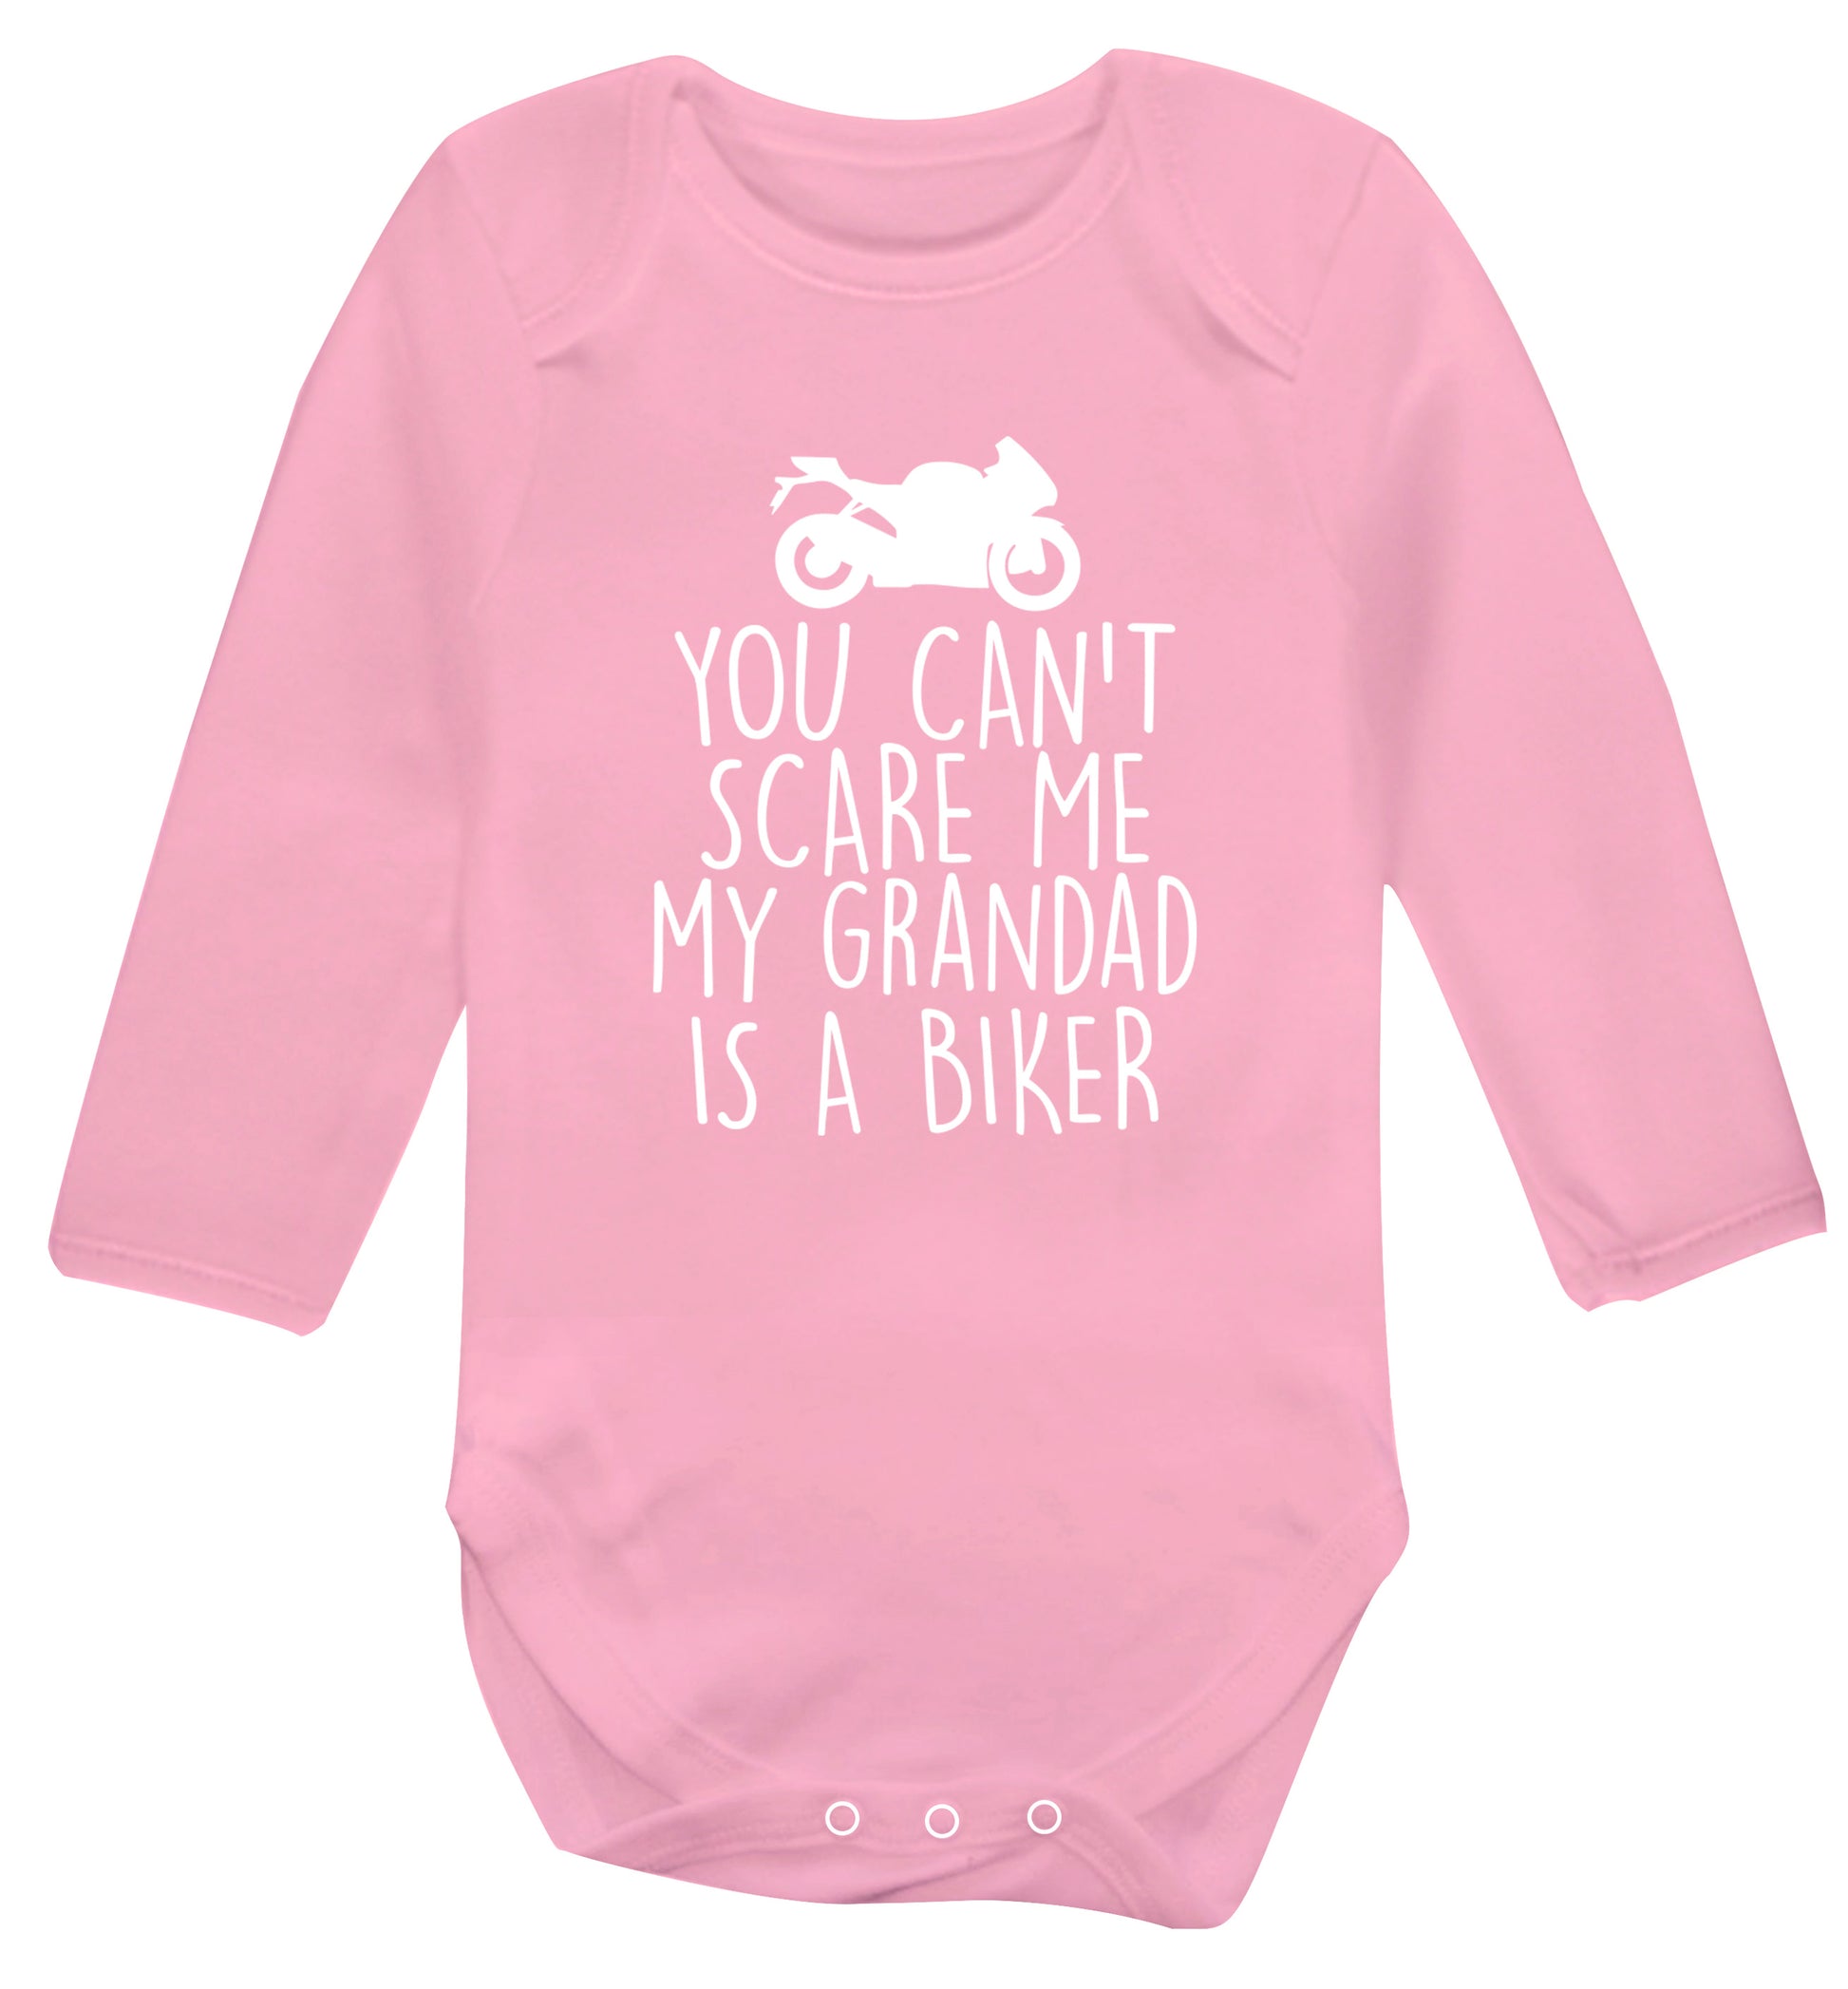 You can't scare me my grandad is a biker Baby Vest long sleeved pale pink 6-12 months